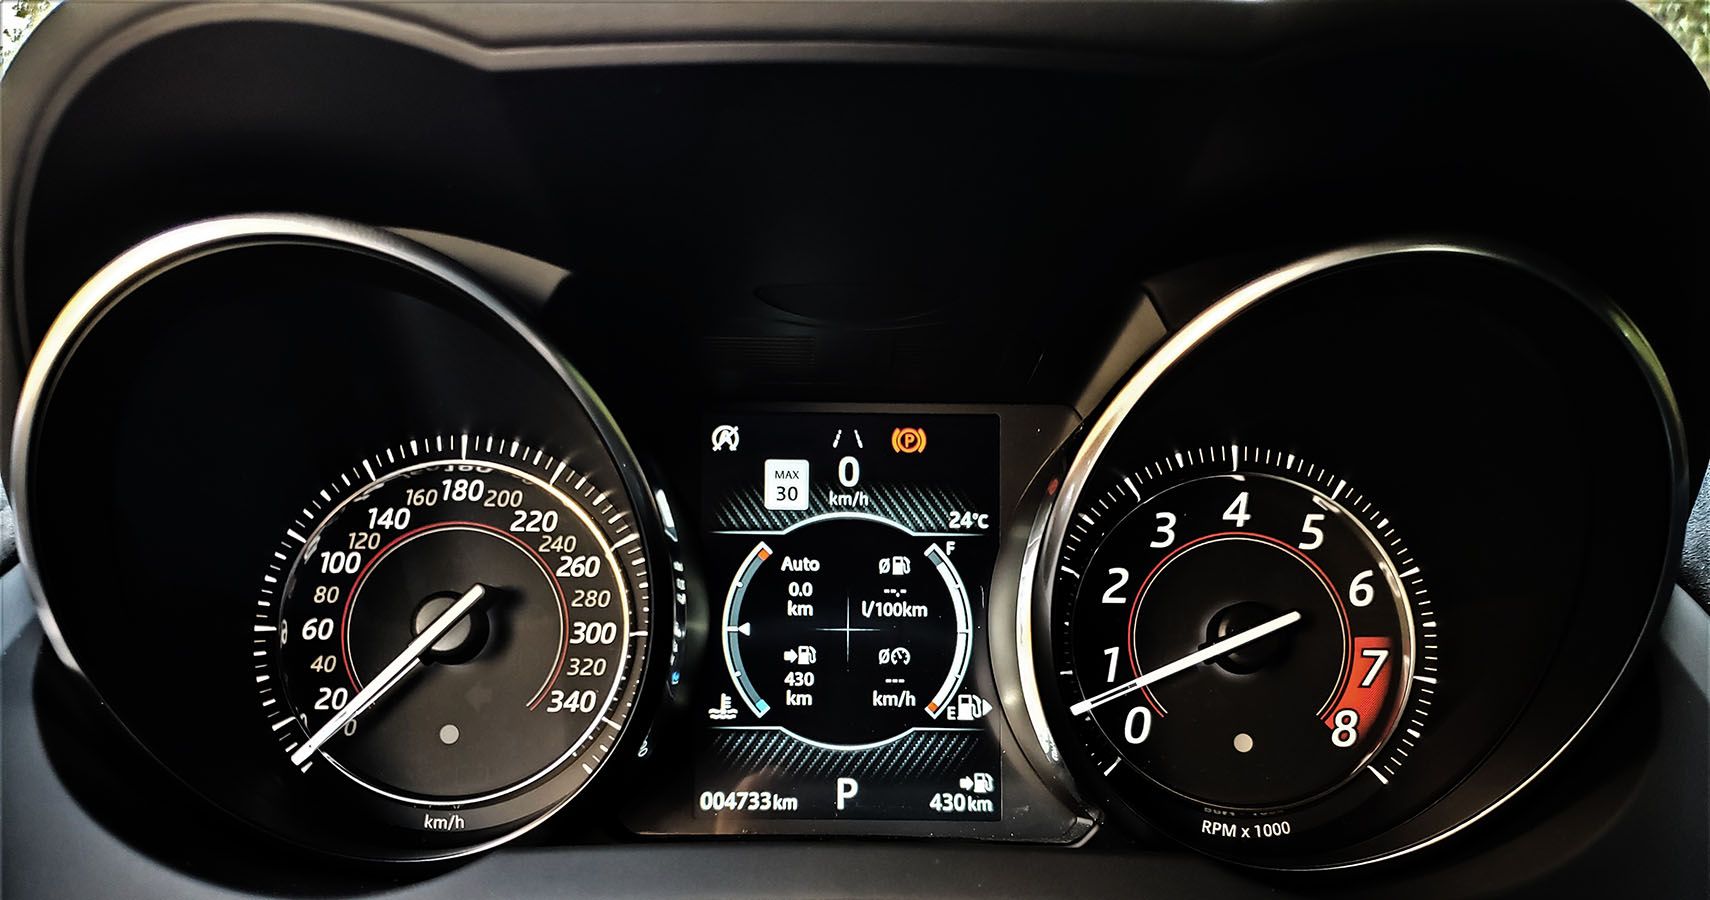 Classic analog gauges feature an advanced multi-information display at center.